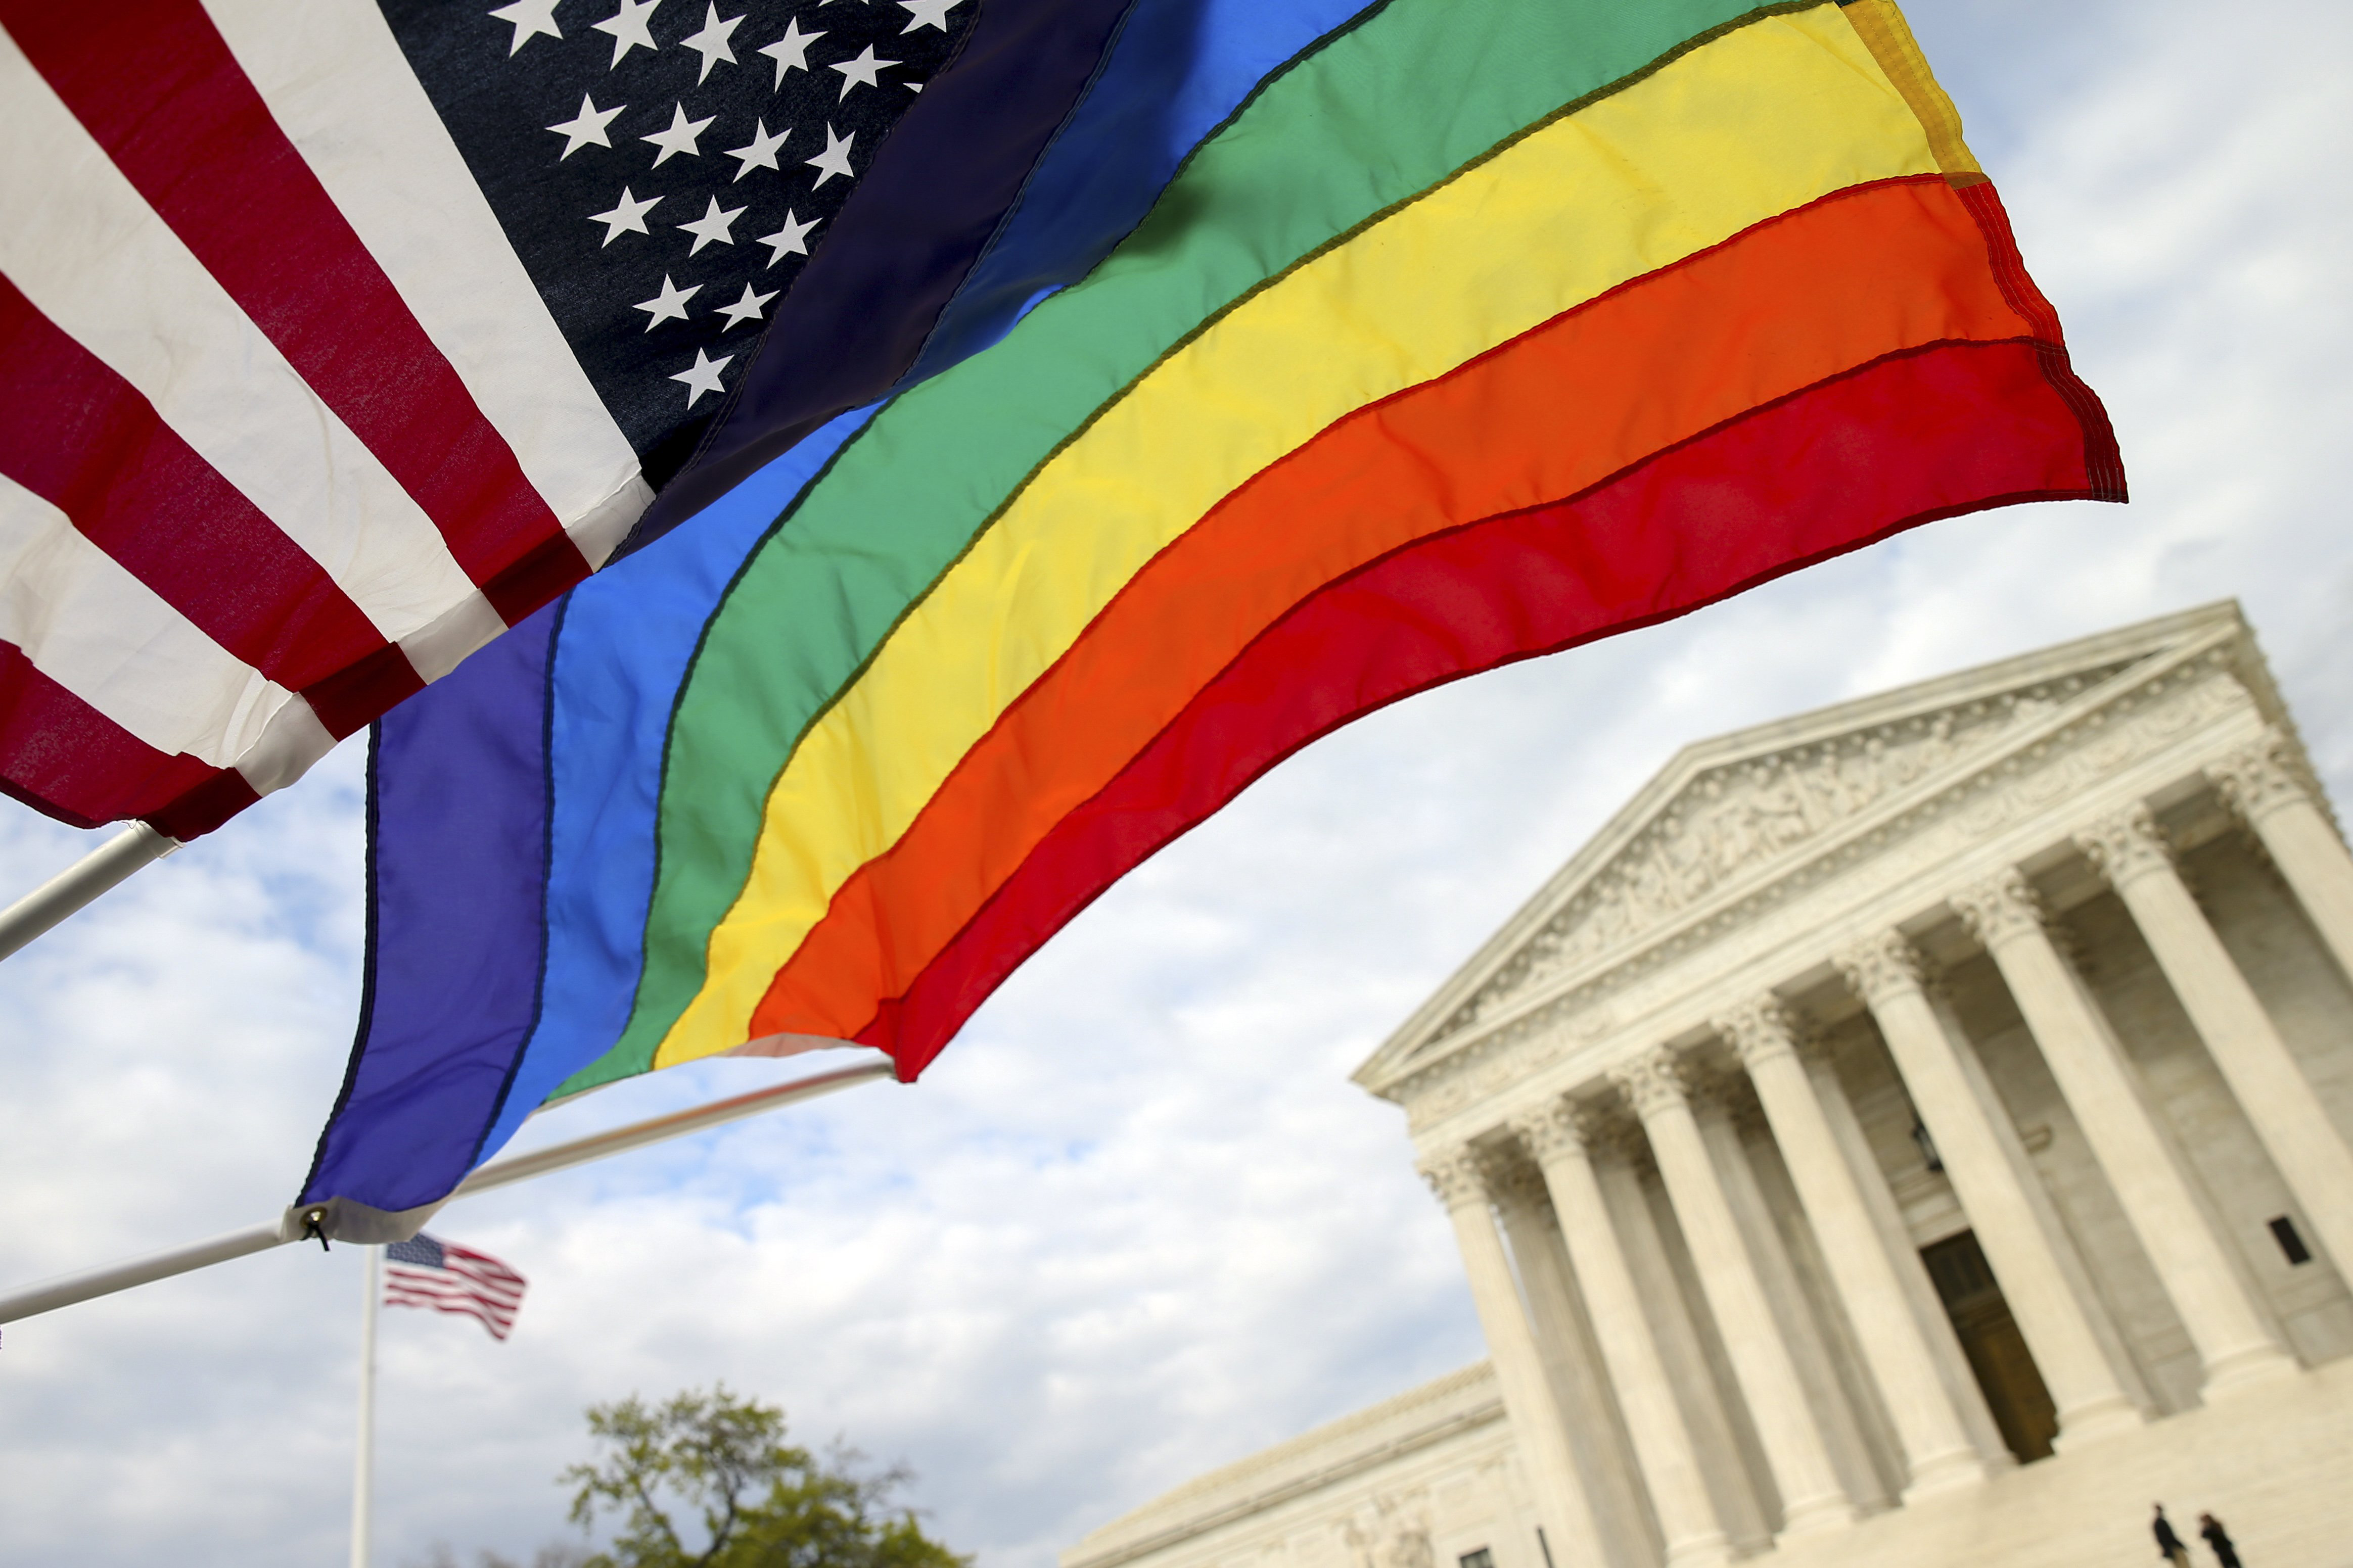 An American flag and a rainbow colored flag flies in front of the Supreme Court in Washington, April 27, 2015, as the Supreme Court is scheduled to hear arguments on the constitutionality of state bans on same-sex marriage on Tuesday. (Andrew Harnik—AP)